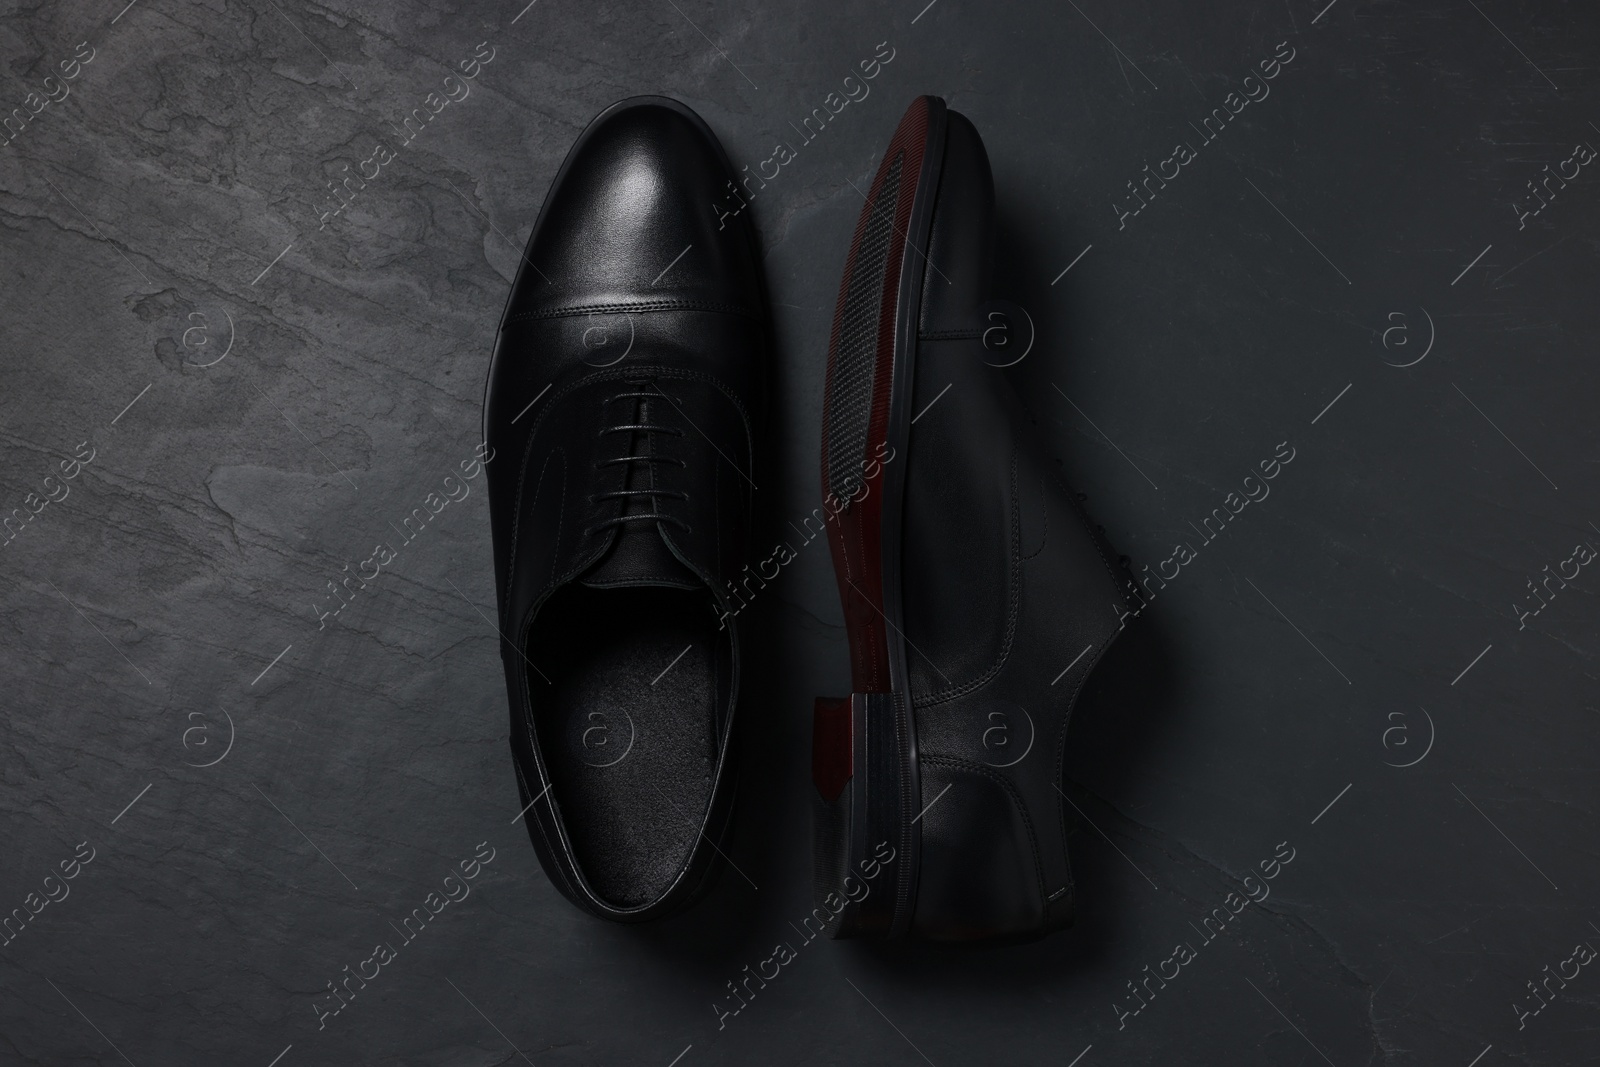 Photo of Pairleather men shoes on black surface, top view